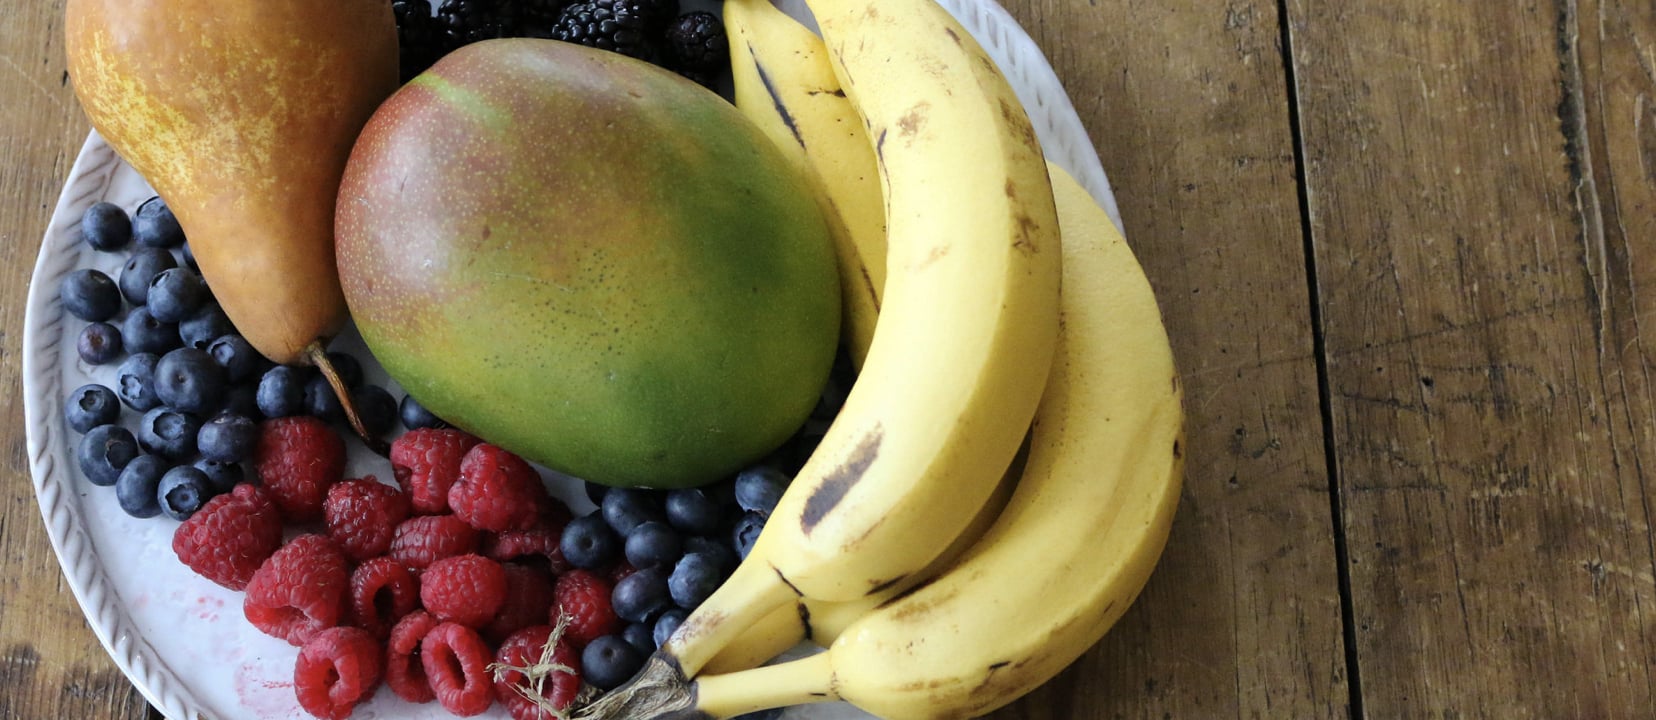 Can You Eat Too Much Fruit?